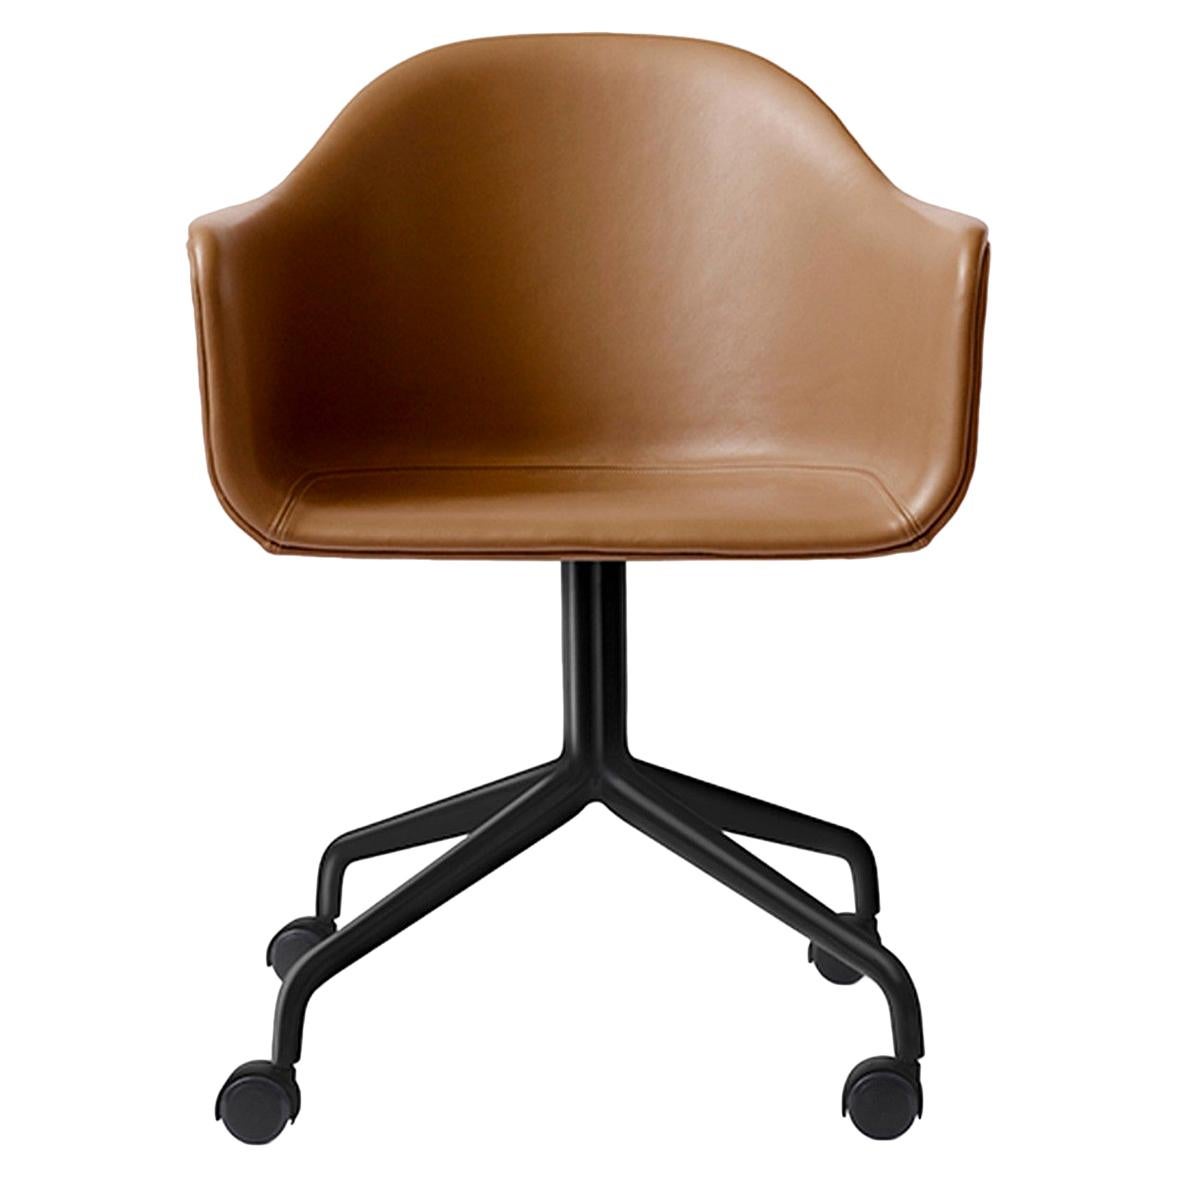 Harbour Chair, Cognac Leather Chair Black Steel Swivel Base and Casters For Sale